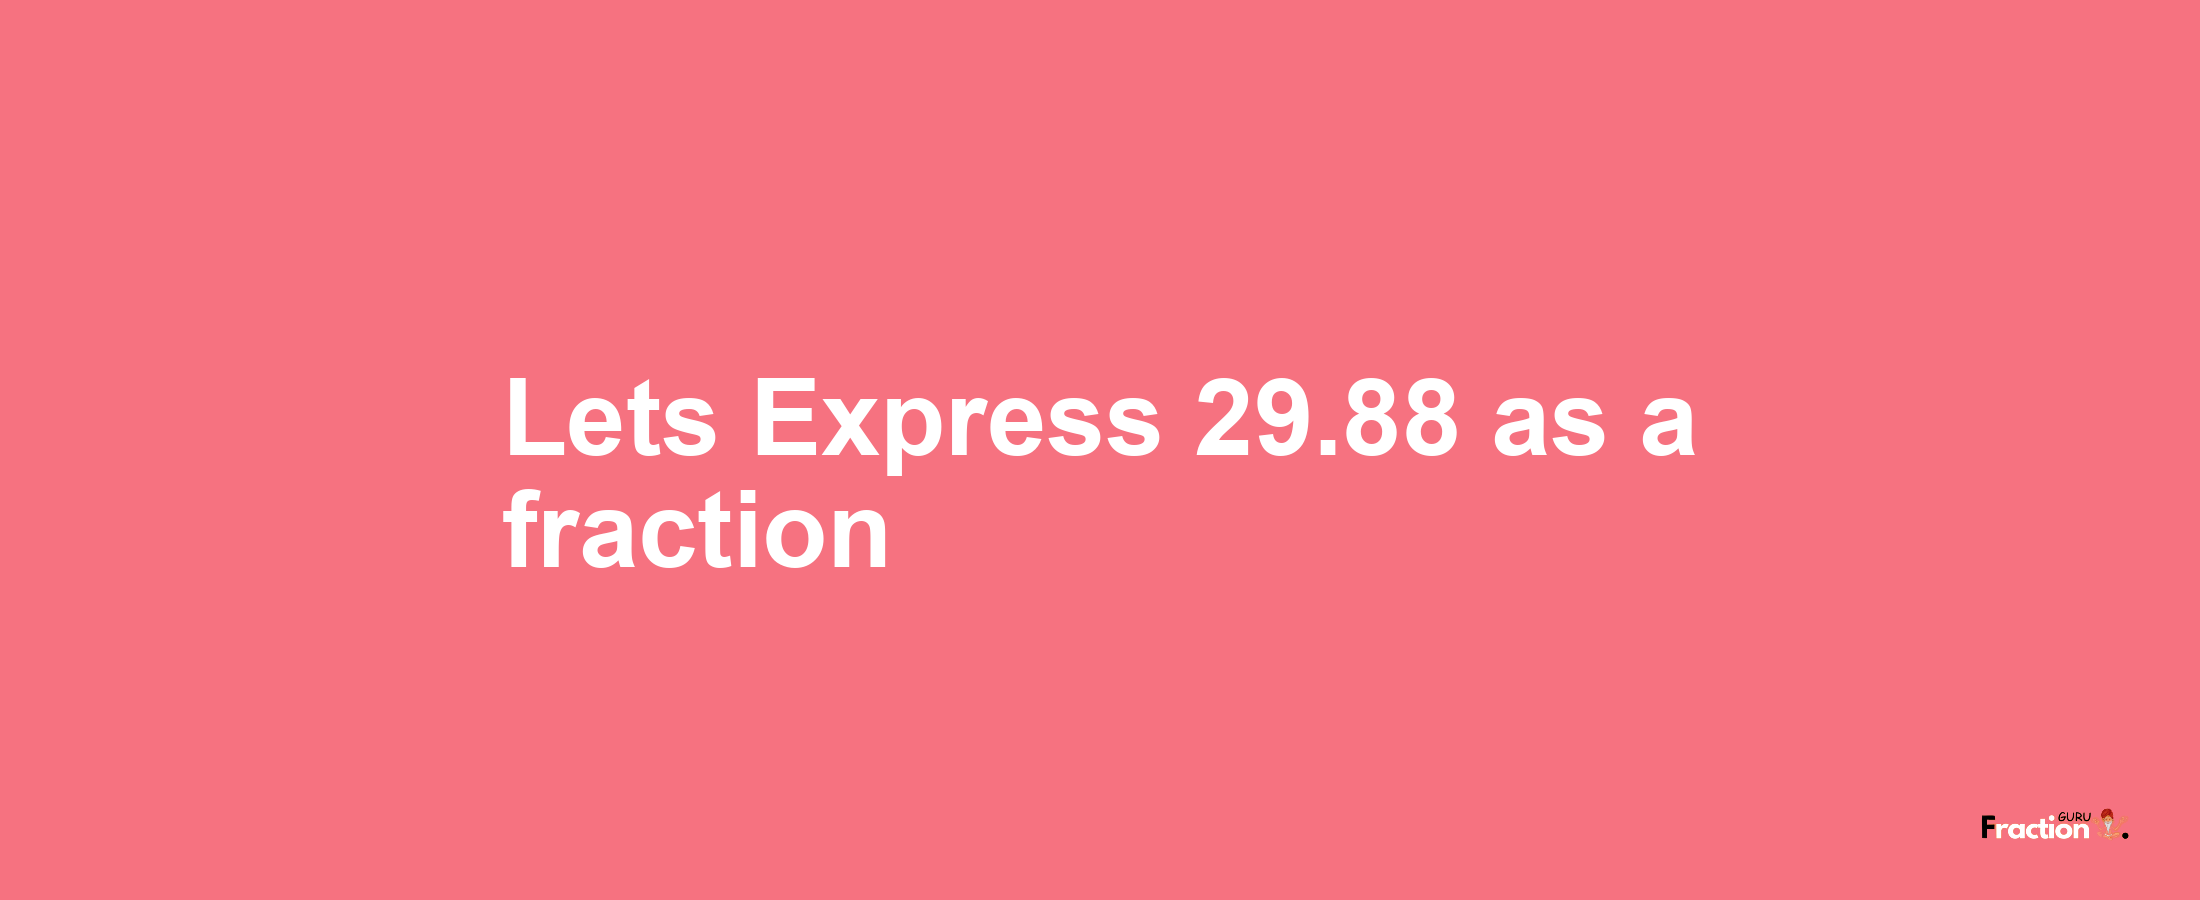 Lets Express 29.88 as afraction